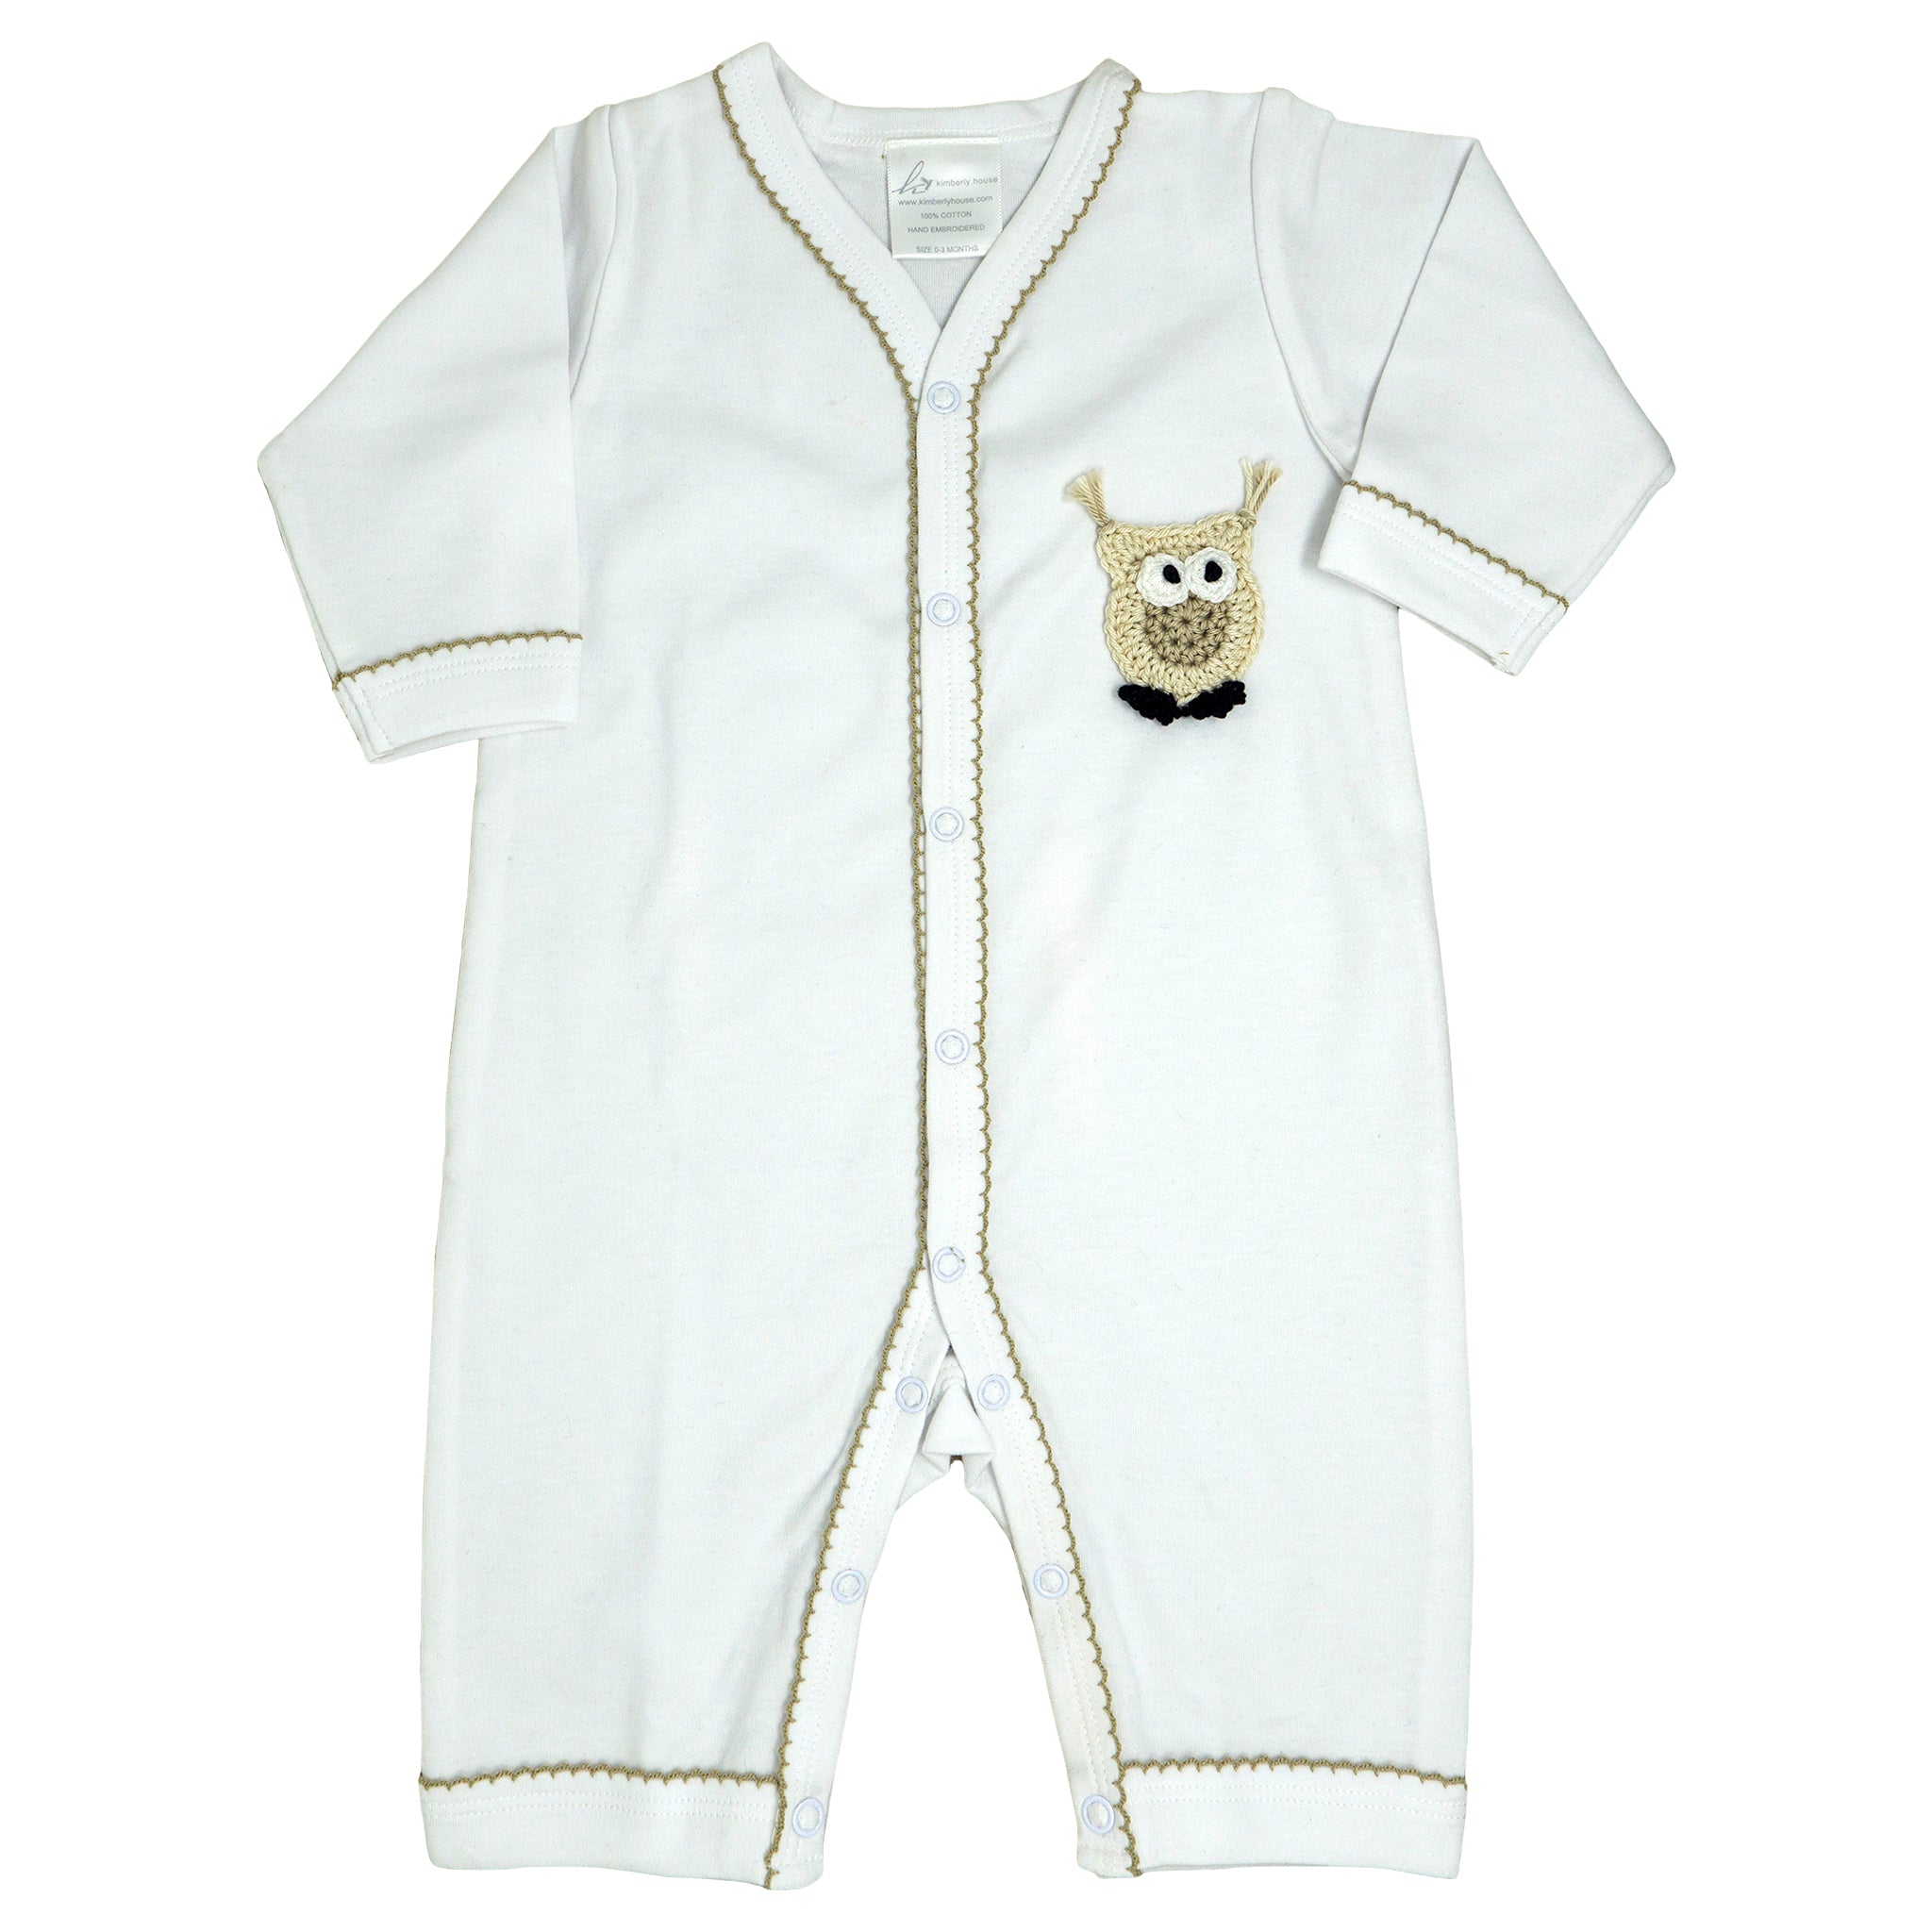 long body onesie with a beige crocheted owl